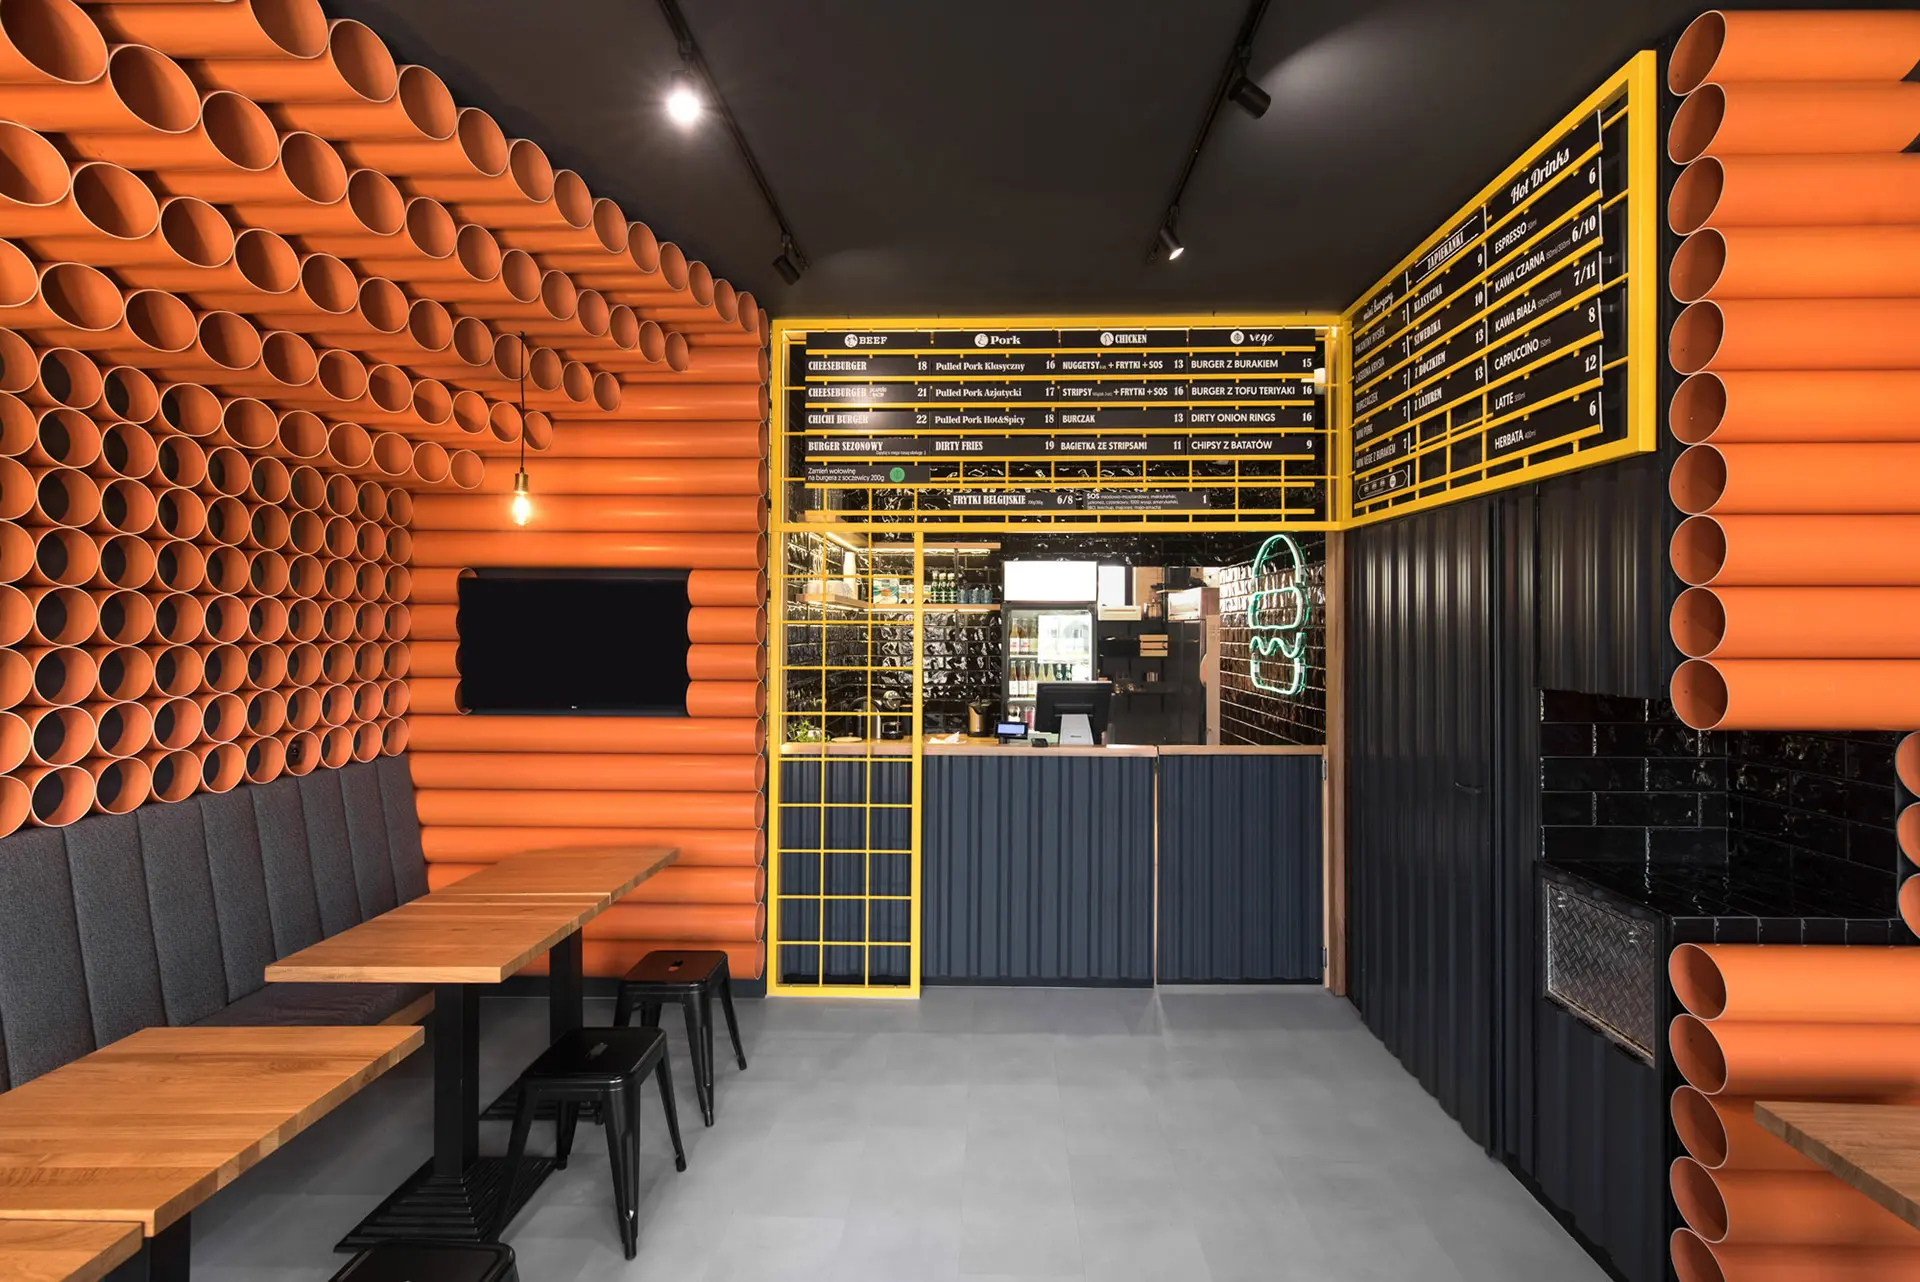 Burger place ChiChi 4U makes unconventional use of construction materials